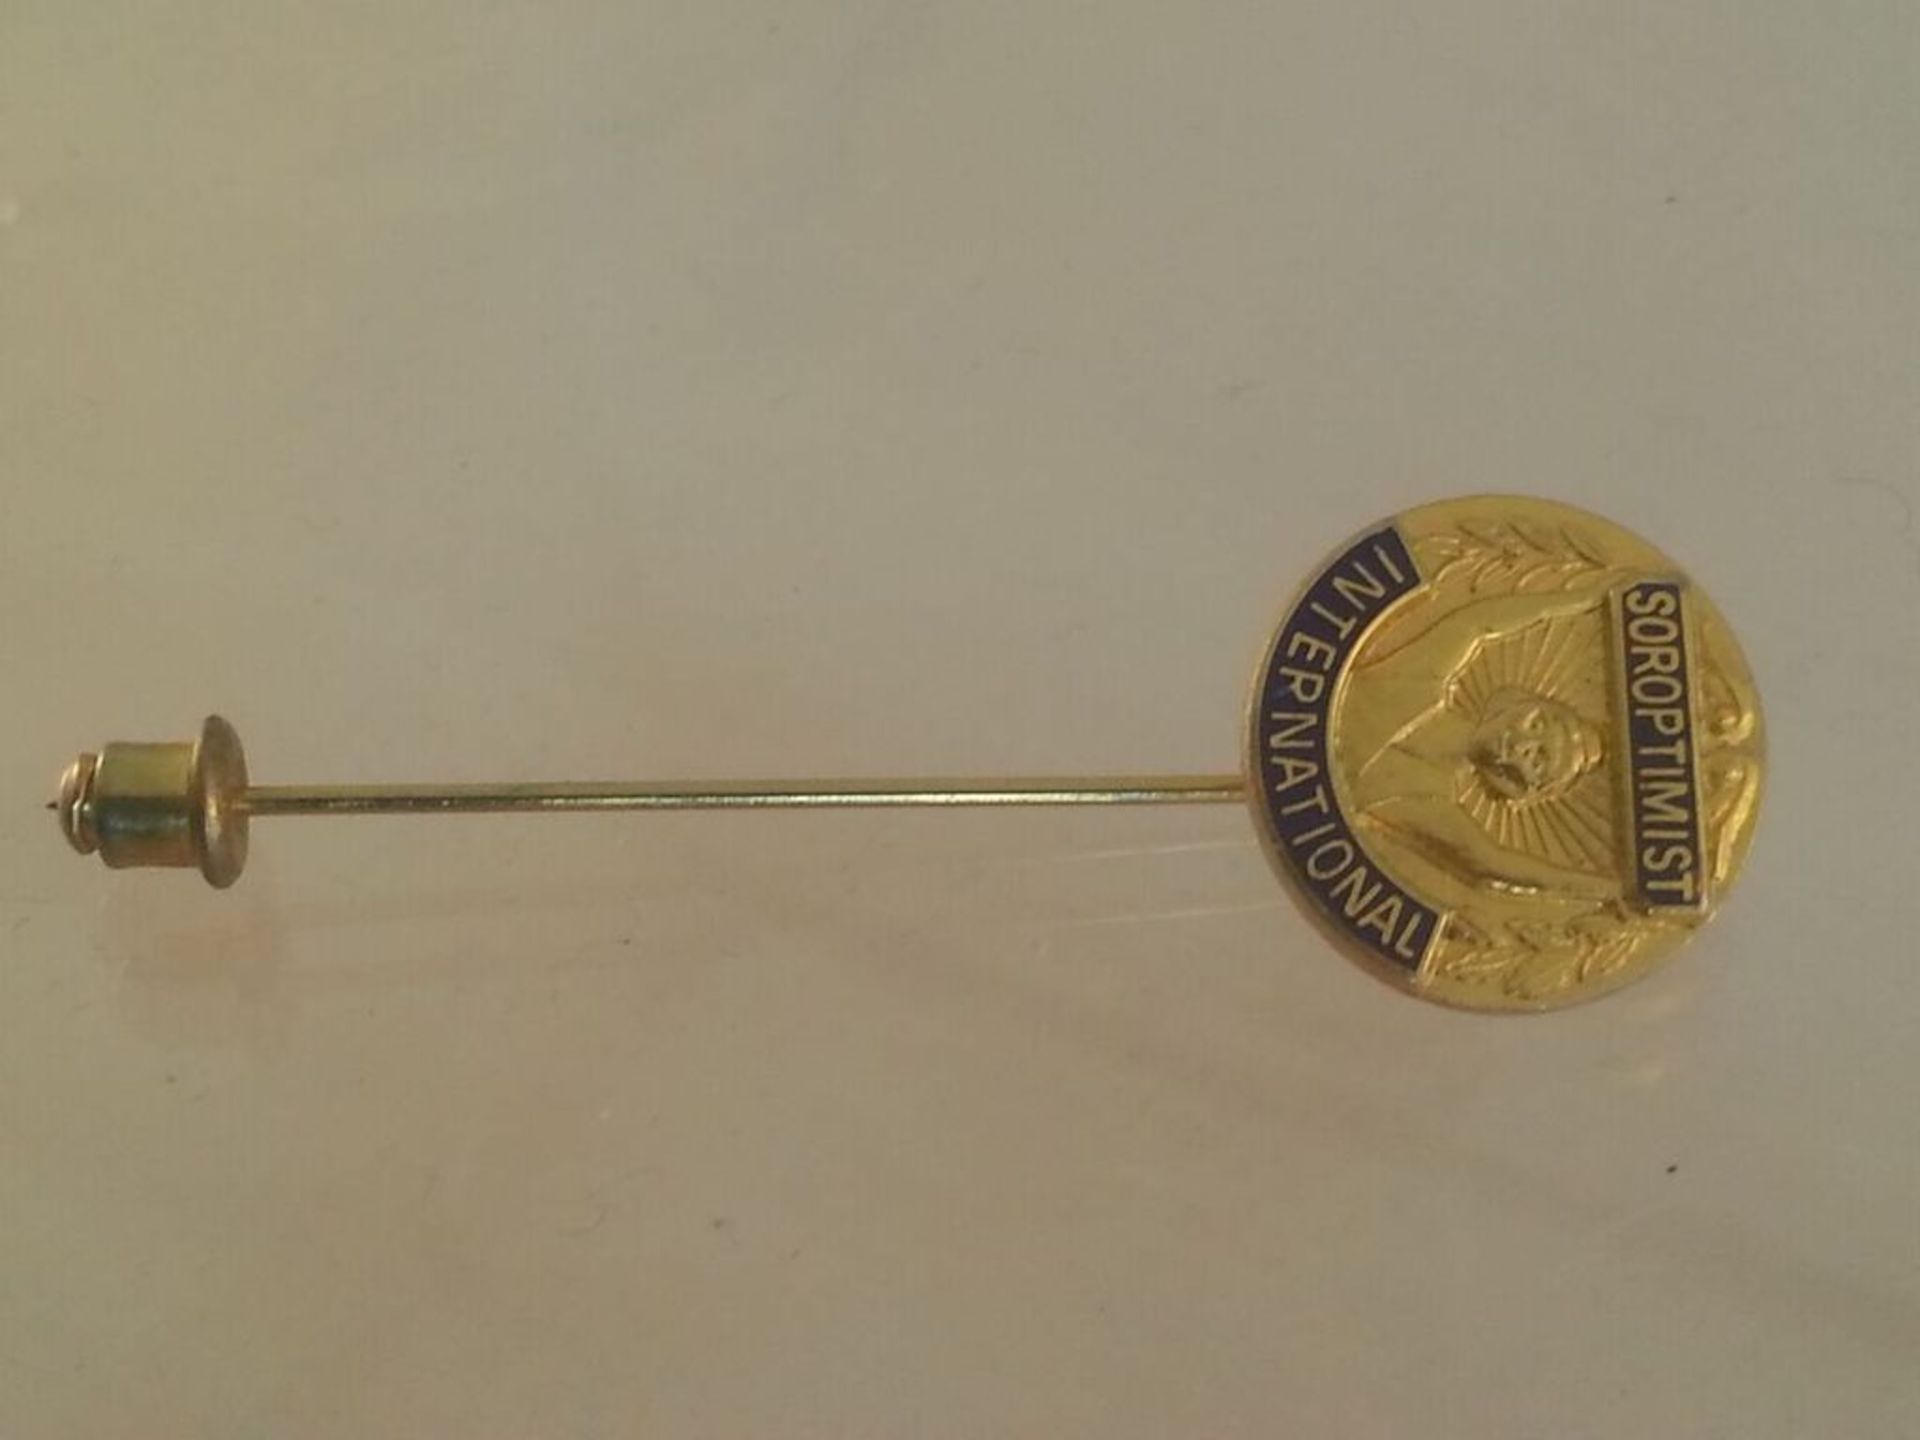 SOROPTIMIST INTERNATIONAL gold tone pin Low cost delivery available on all items. This is a low